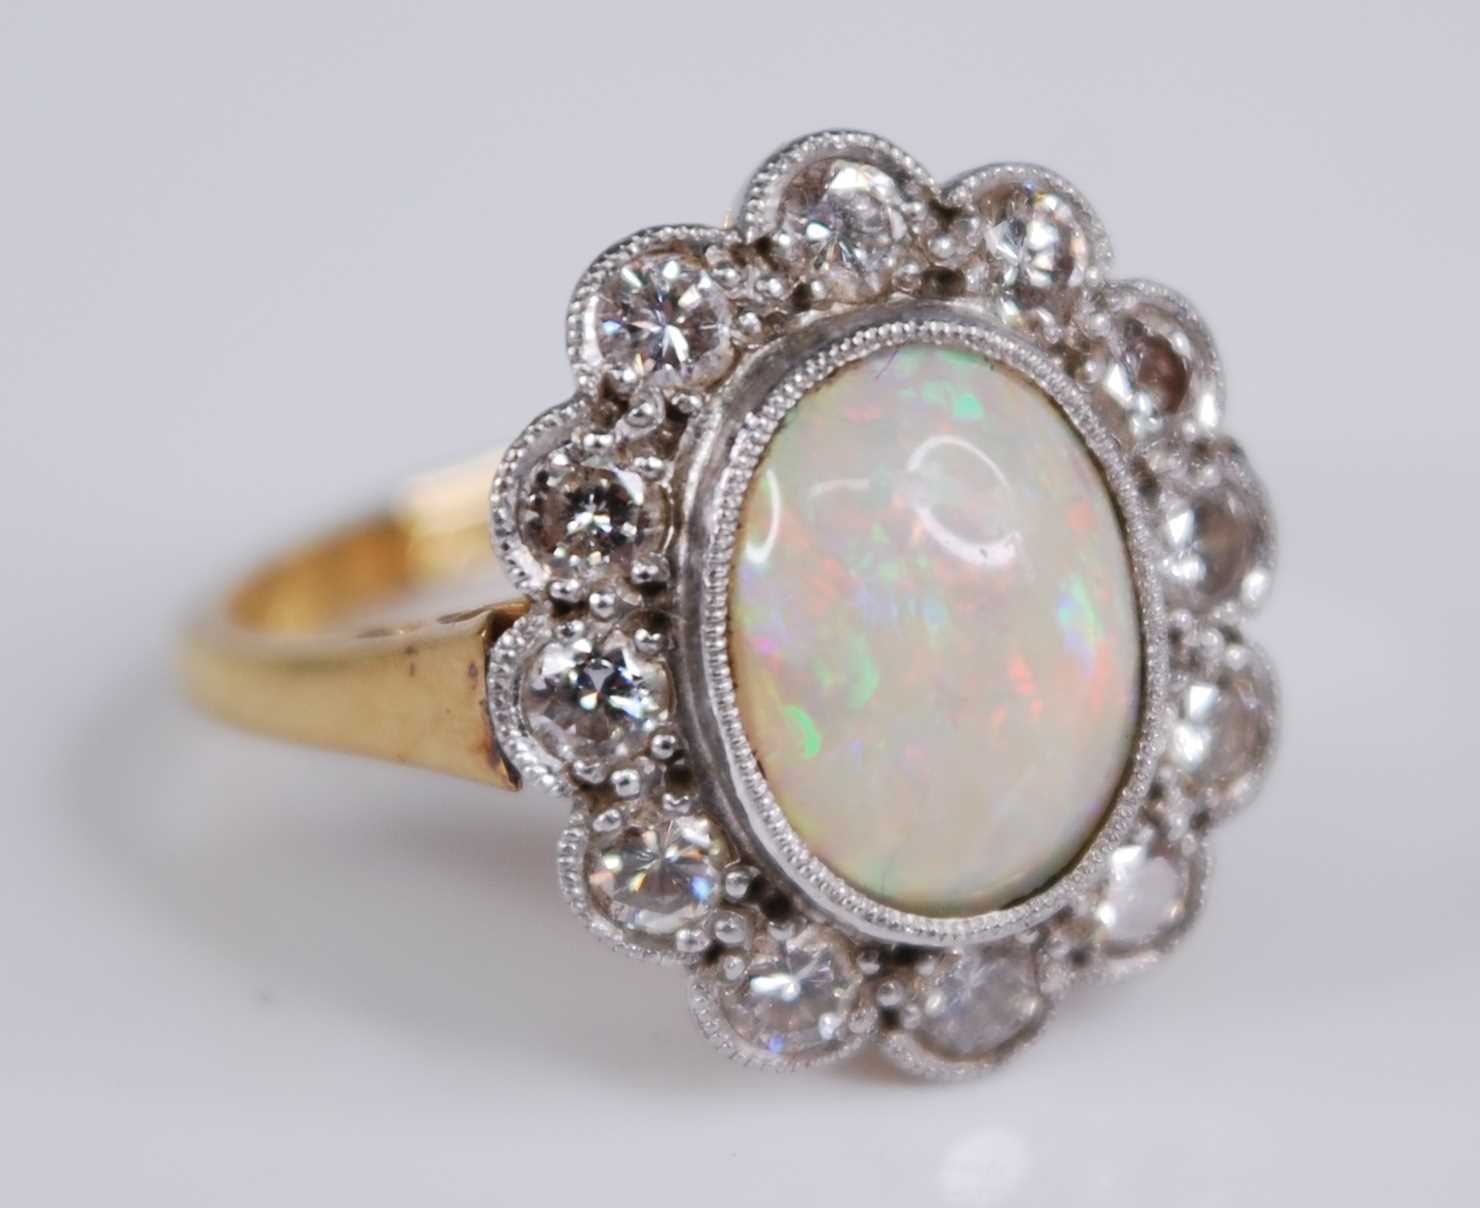 An 18ct gold and platinum, opal and diamond set cluster ring, arranged as a central opal cabochon